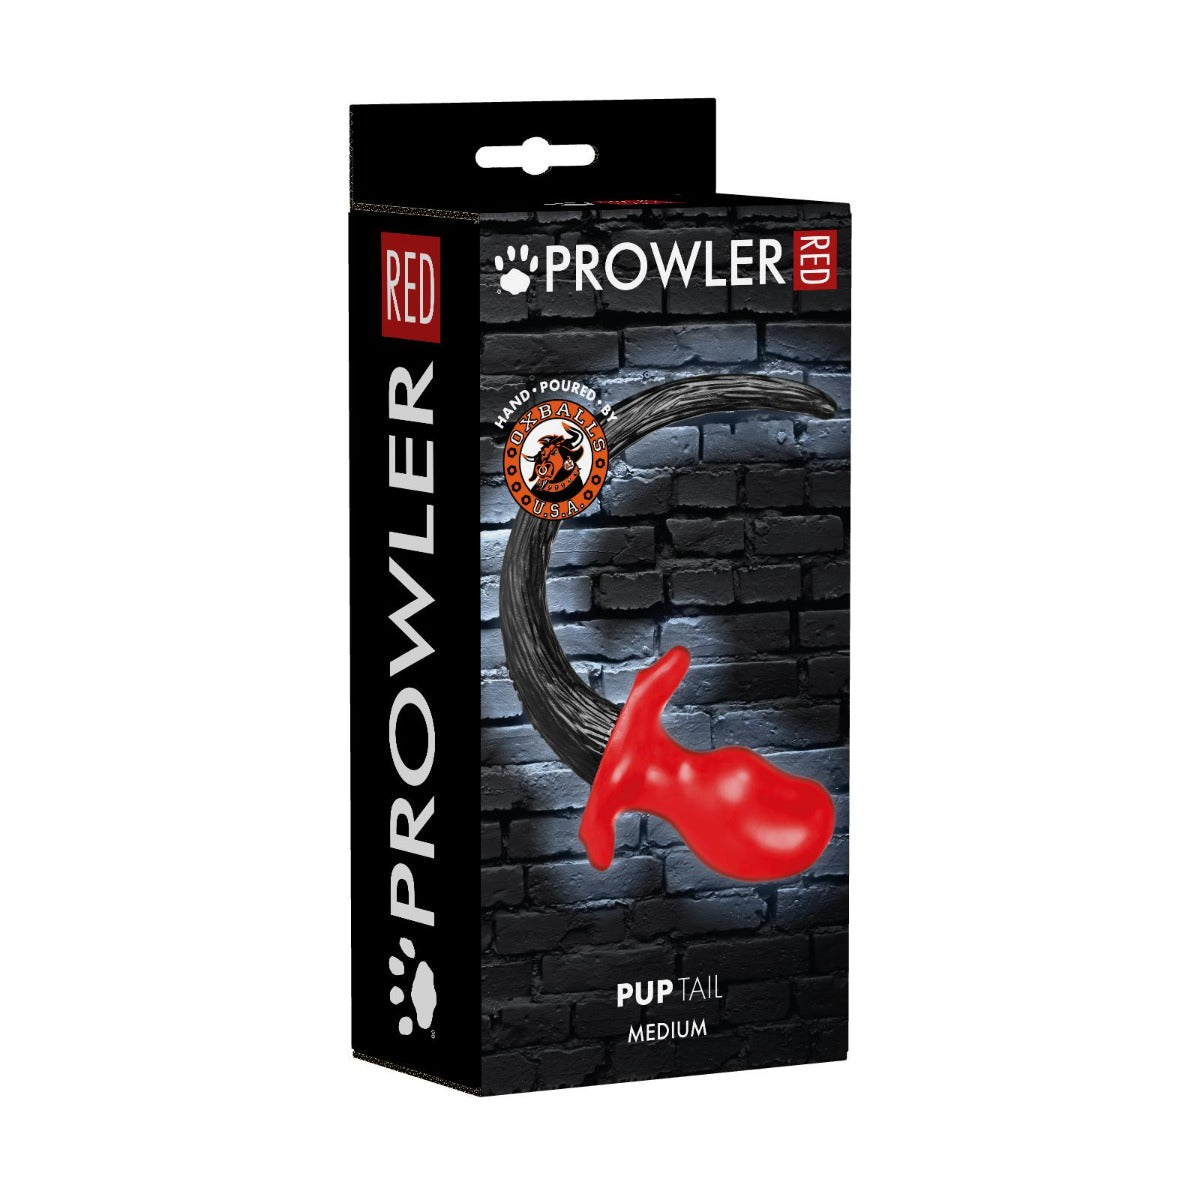 Butt Plugs Prowler RED PUPTAIL by Oxballs Medium   